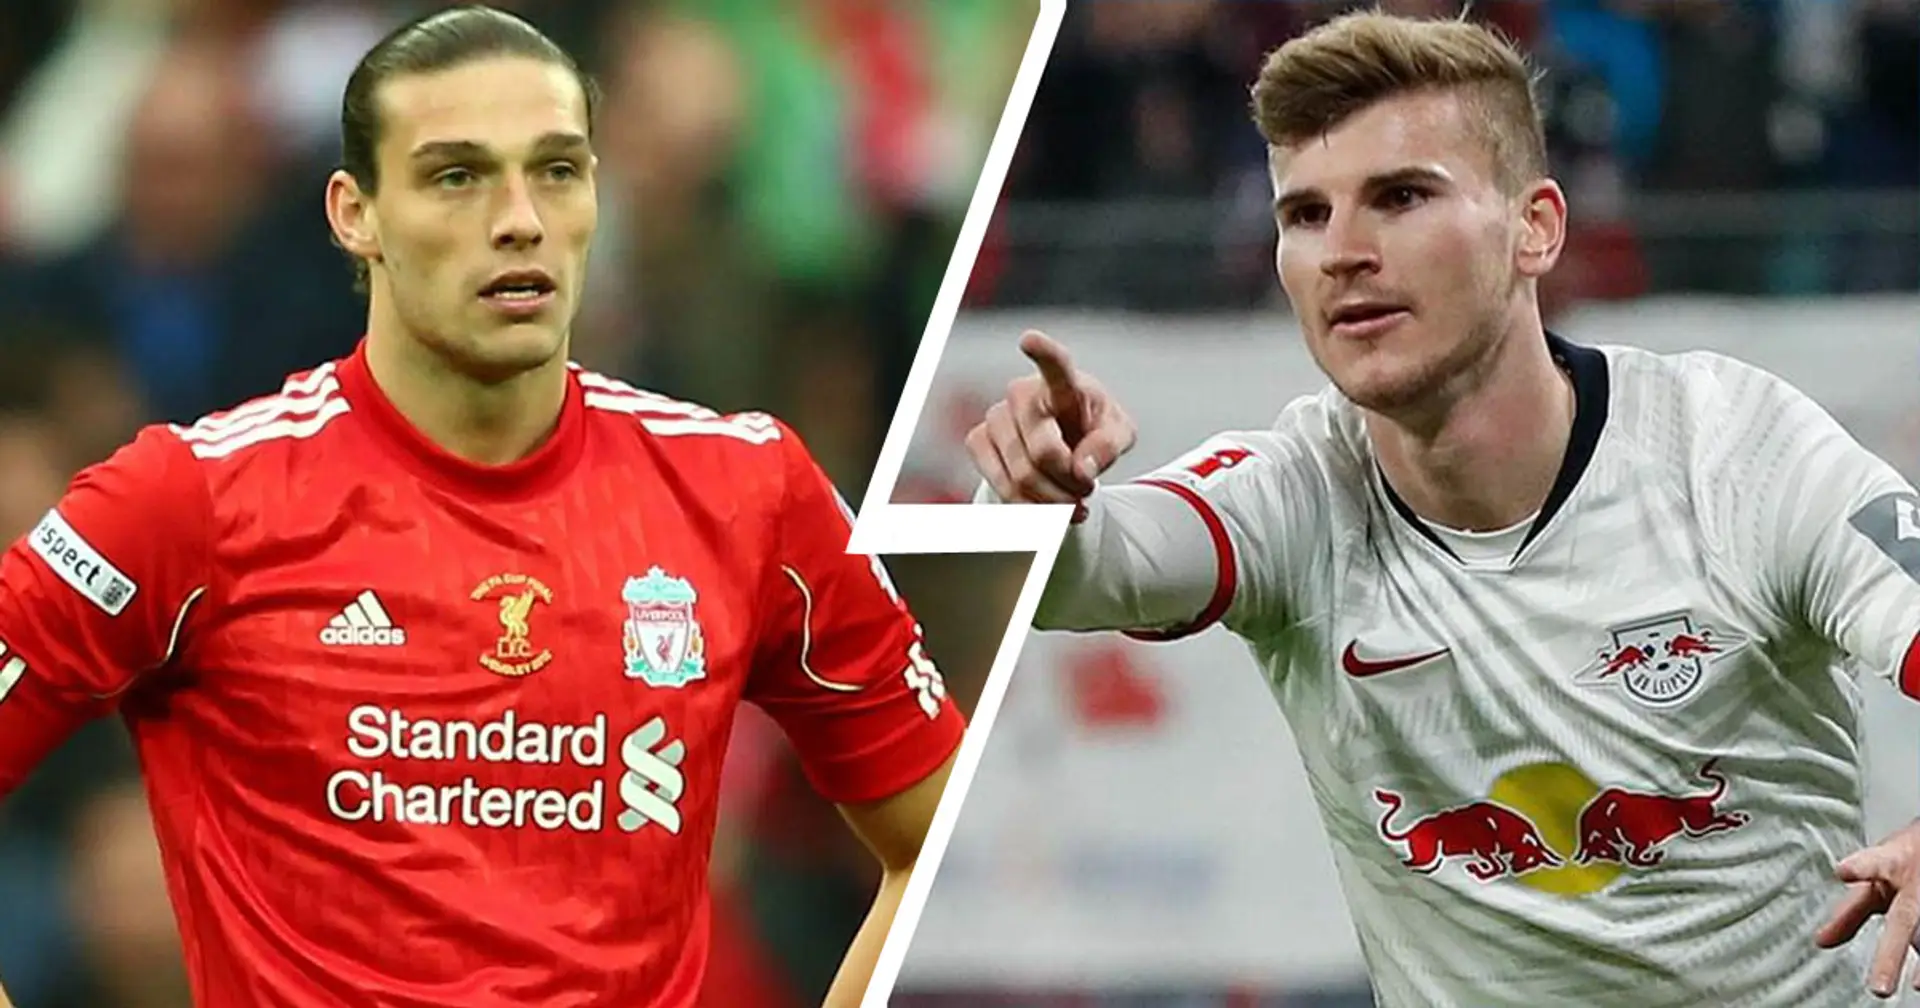 'Hope he won't be next Andy Carroll': Fan shares major concern about Timo Werner's potential LFC move